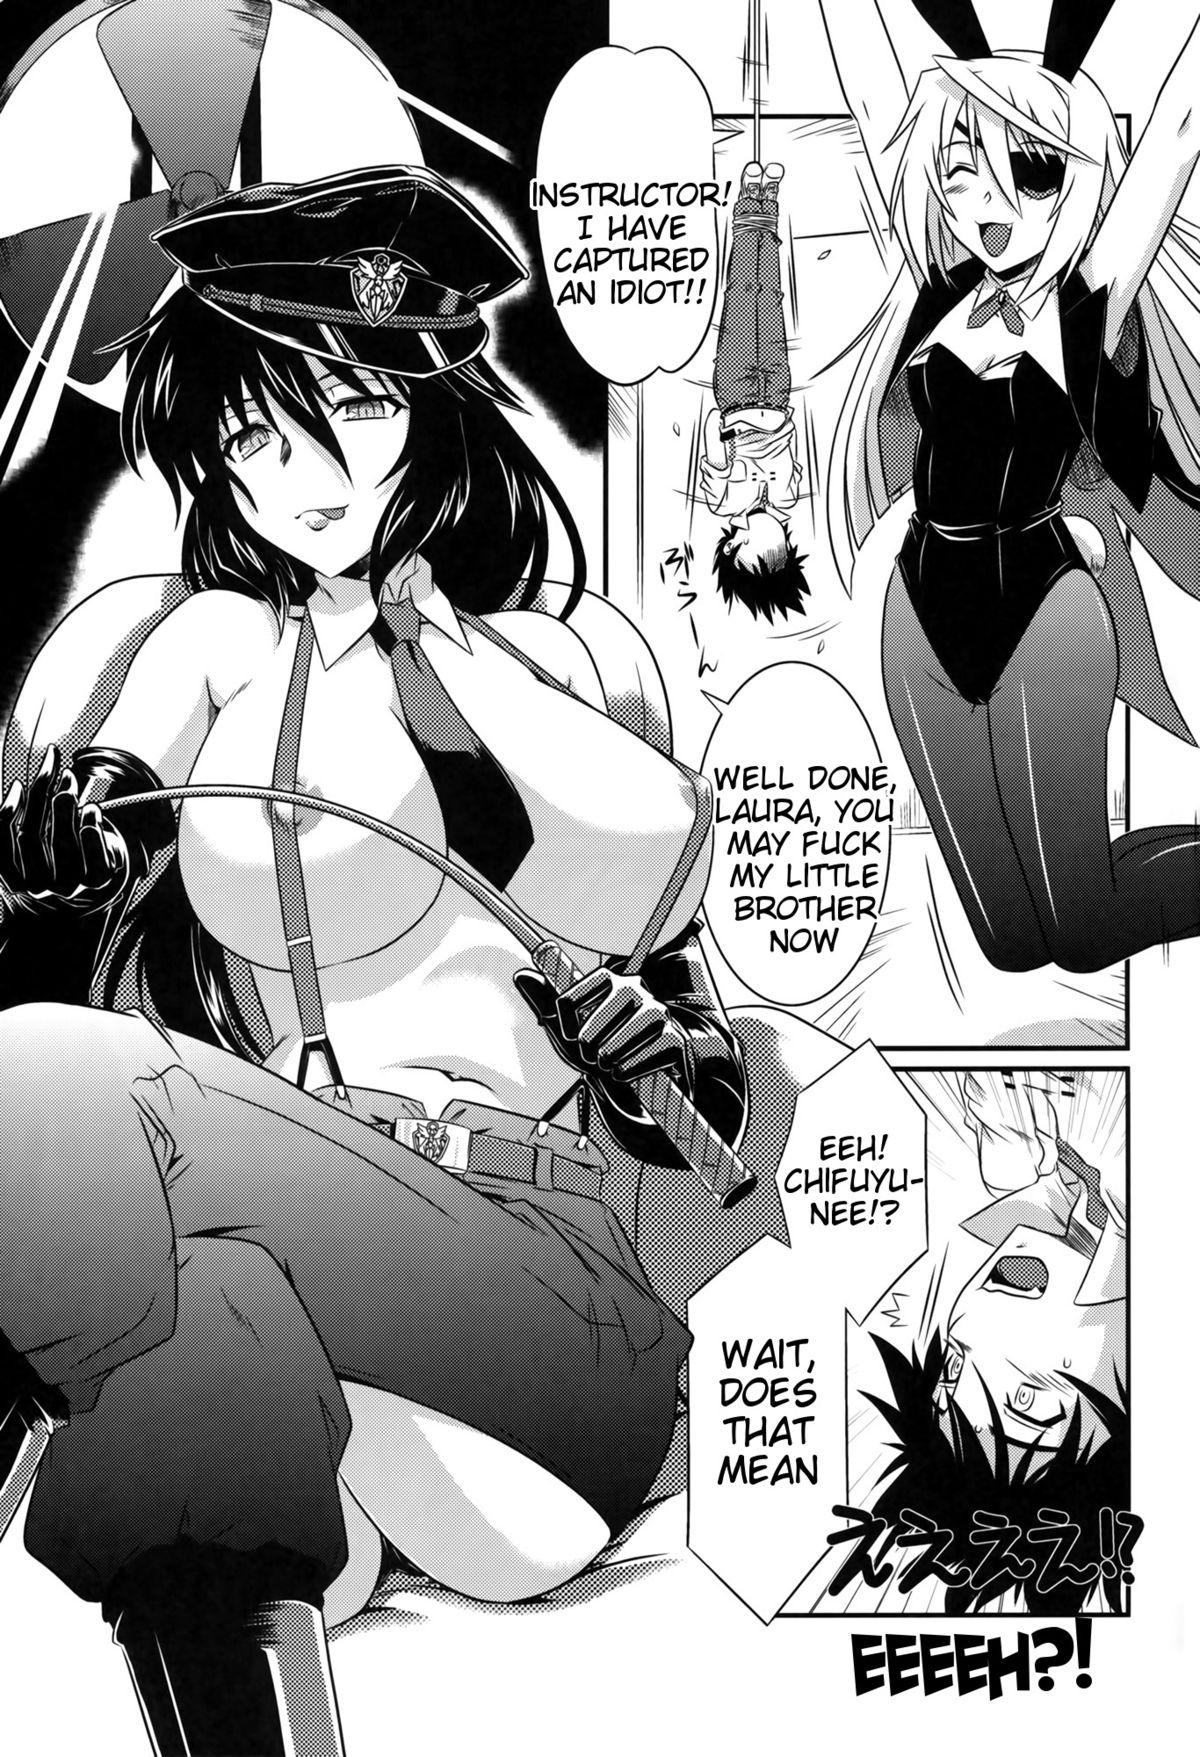 Flagra is Incest Strategy 4 - Infinite stratos Arrecha - Page 5